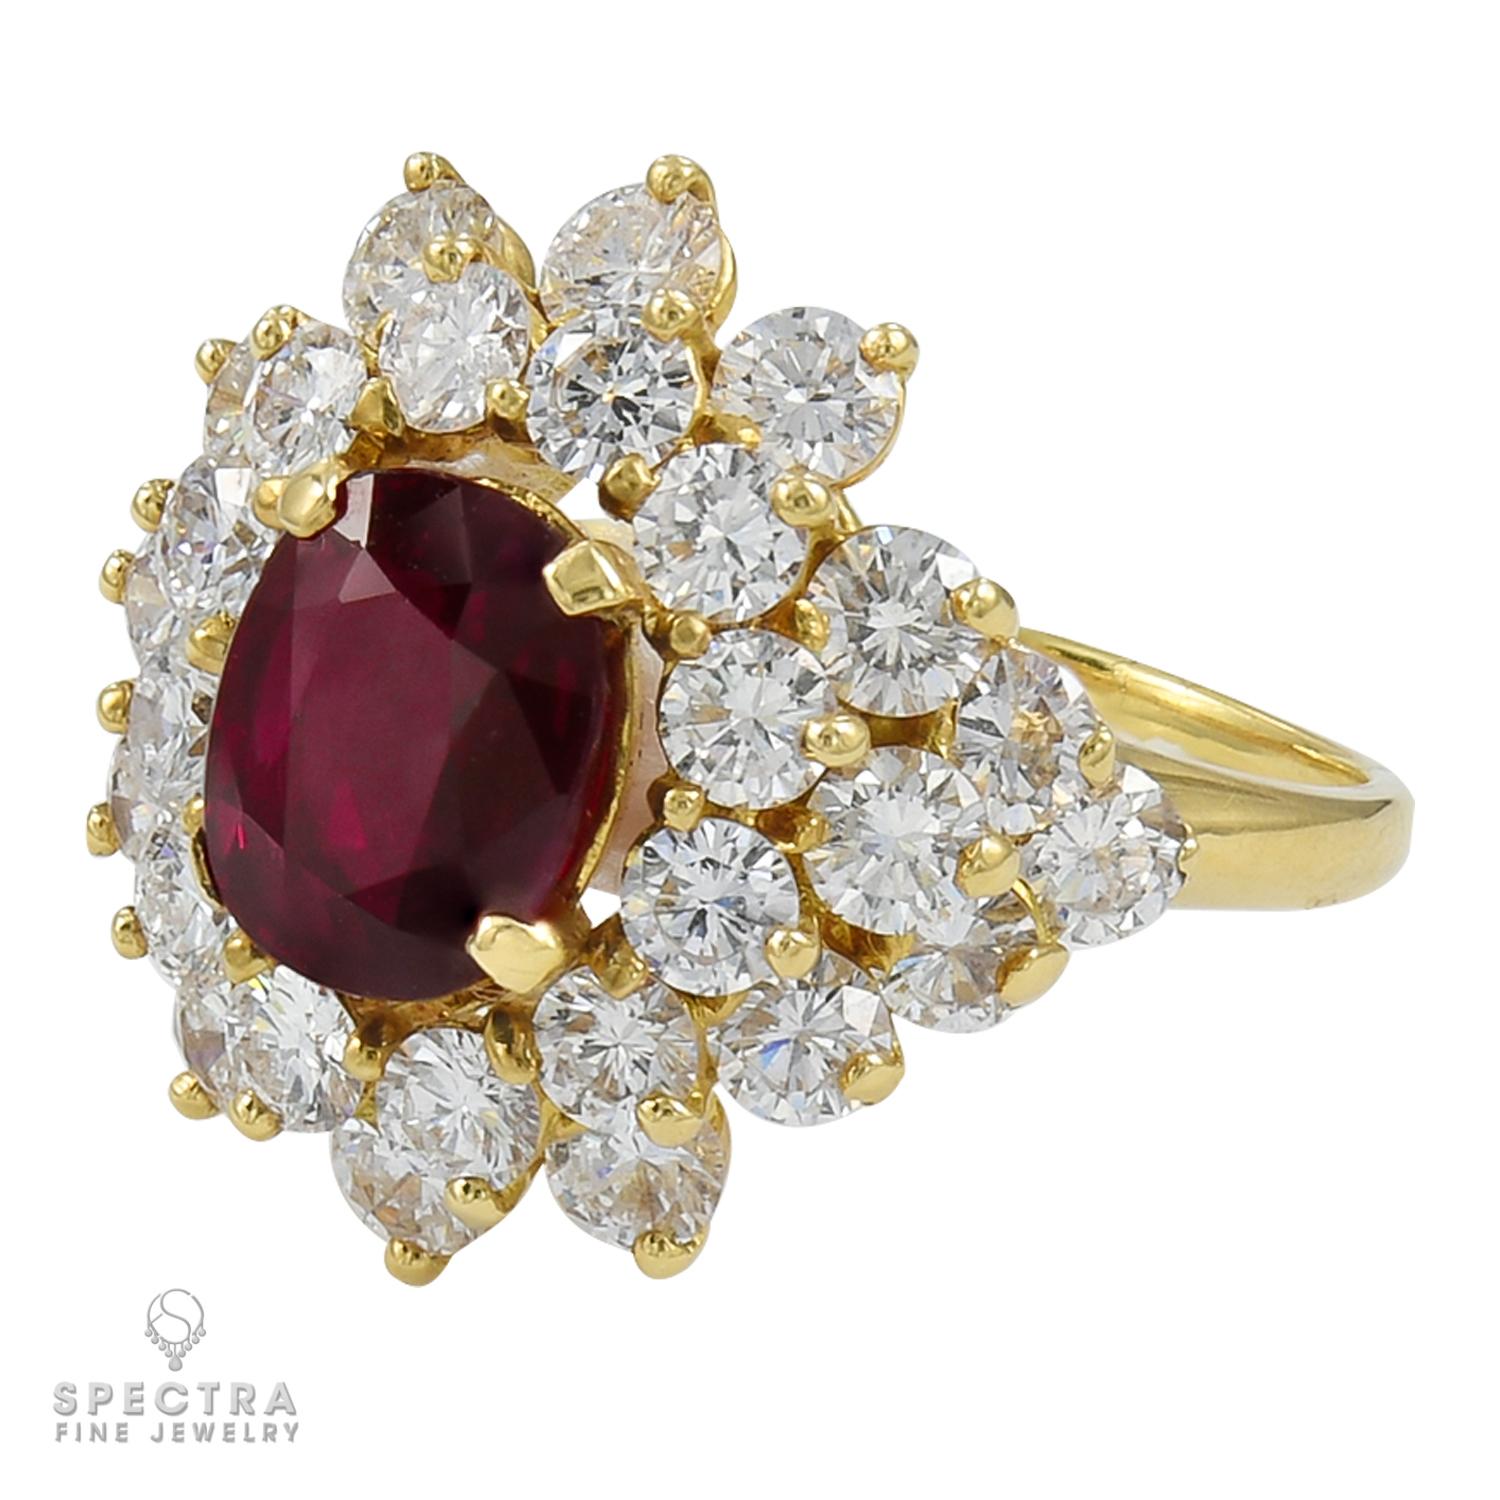 A fancy cocktail ring featuring a 3.01 carat cushion-shaped ruby, surrounded by 30 round diamonds.
The ruby is certified by GRS (Gemresearch Swisslab) stating that the stone is of Thailand origin with the indication of heating.
The diamonds are